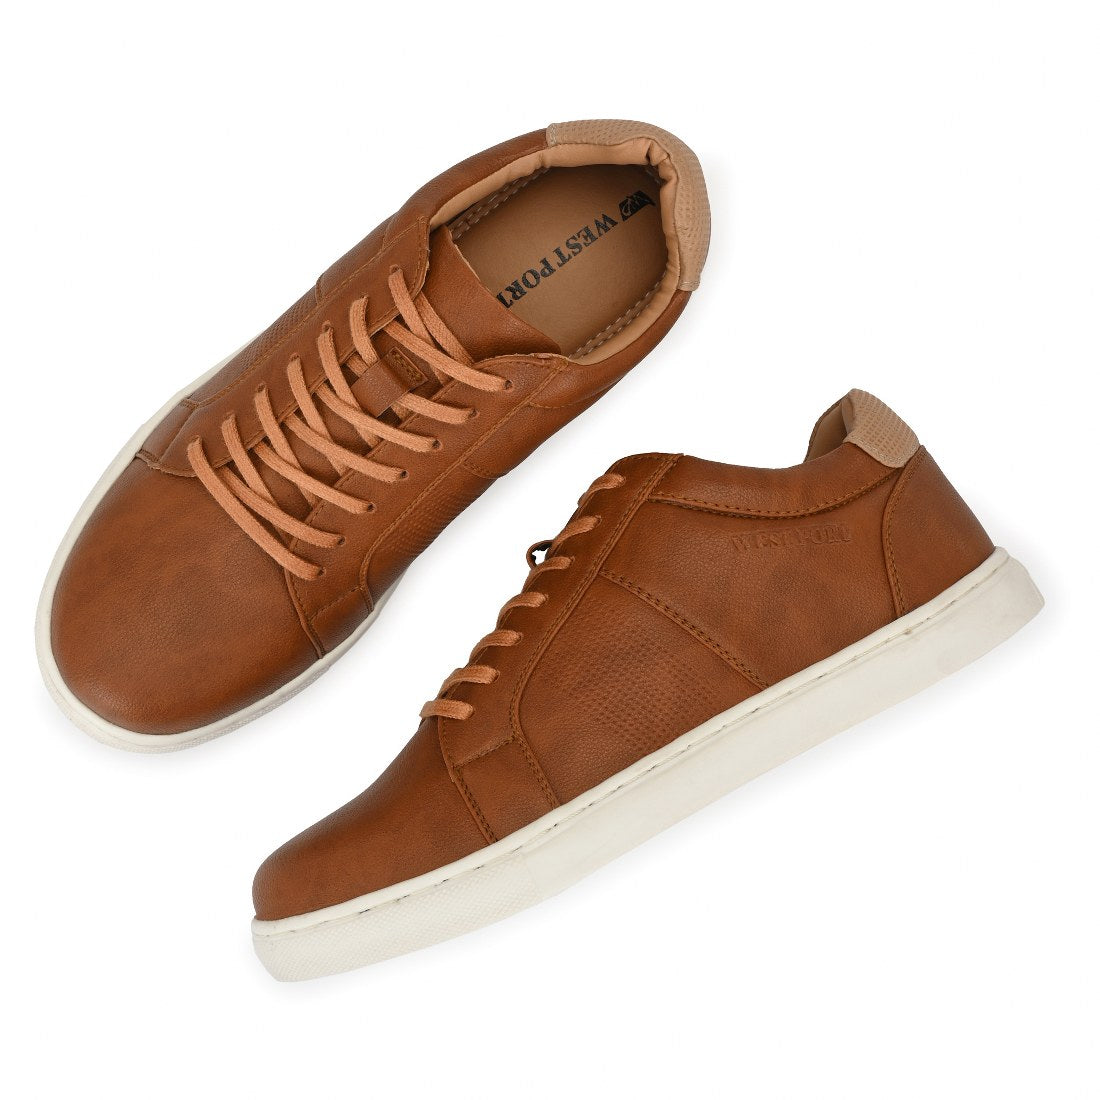 FUN-54 MEN NON-LEATHER TAN CASUAL LACE UP SNEAKERS